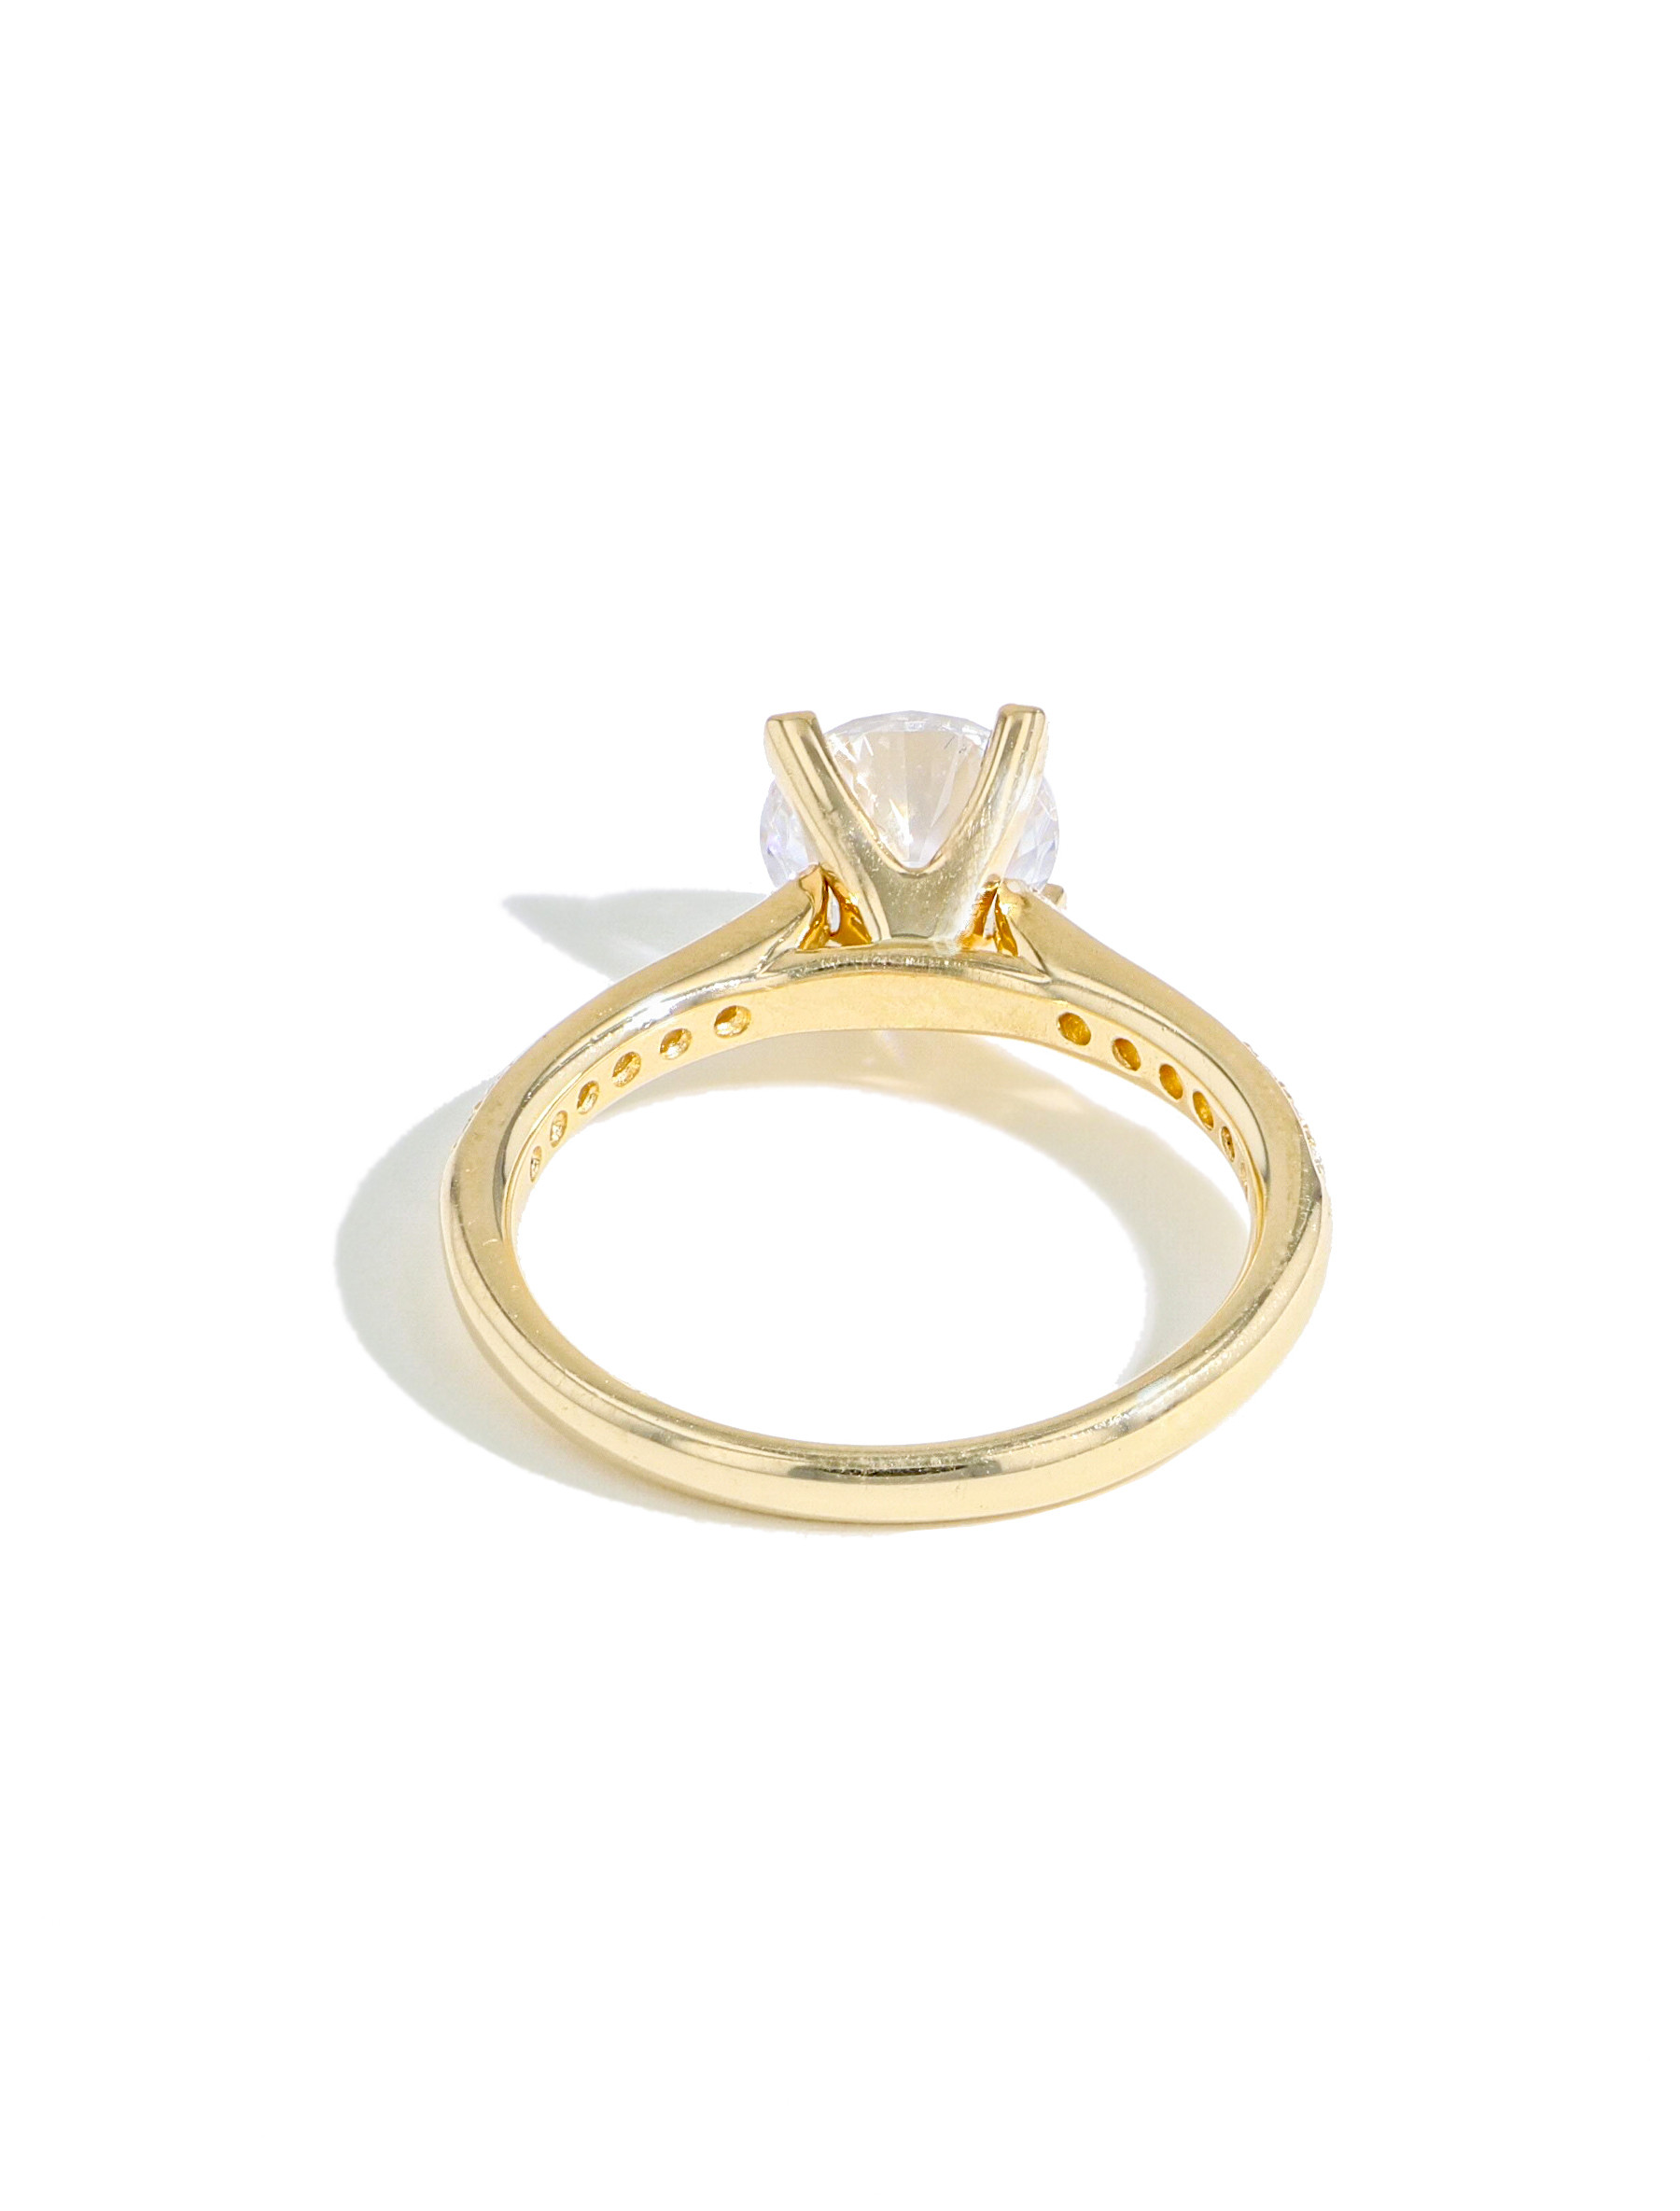 The Round Solitaire Pave Engagement Ring Setting in Yellow Gold back view